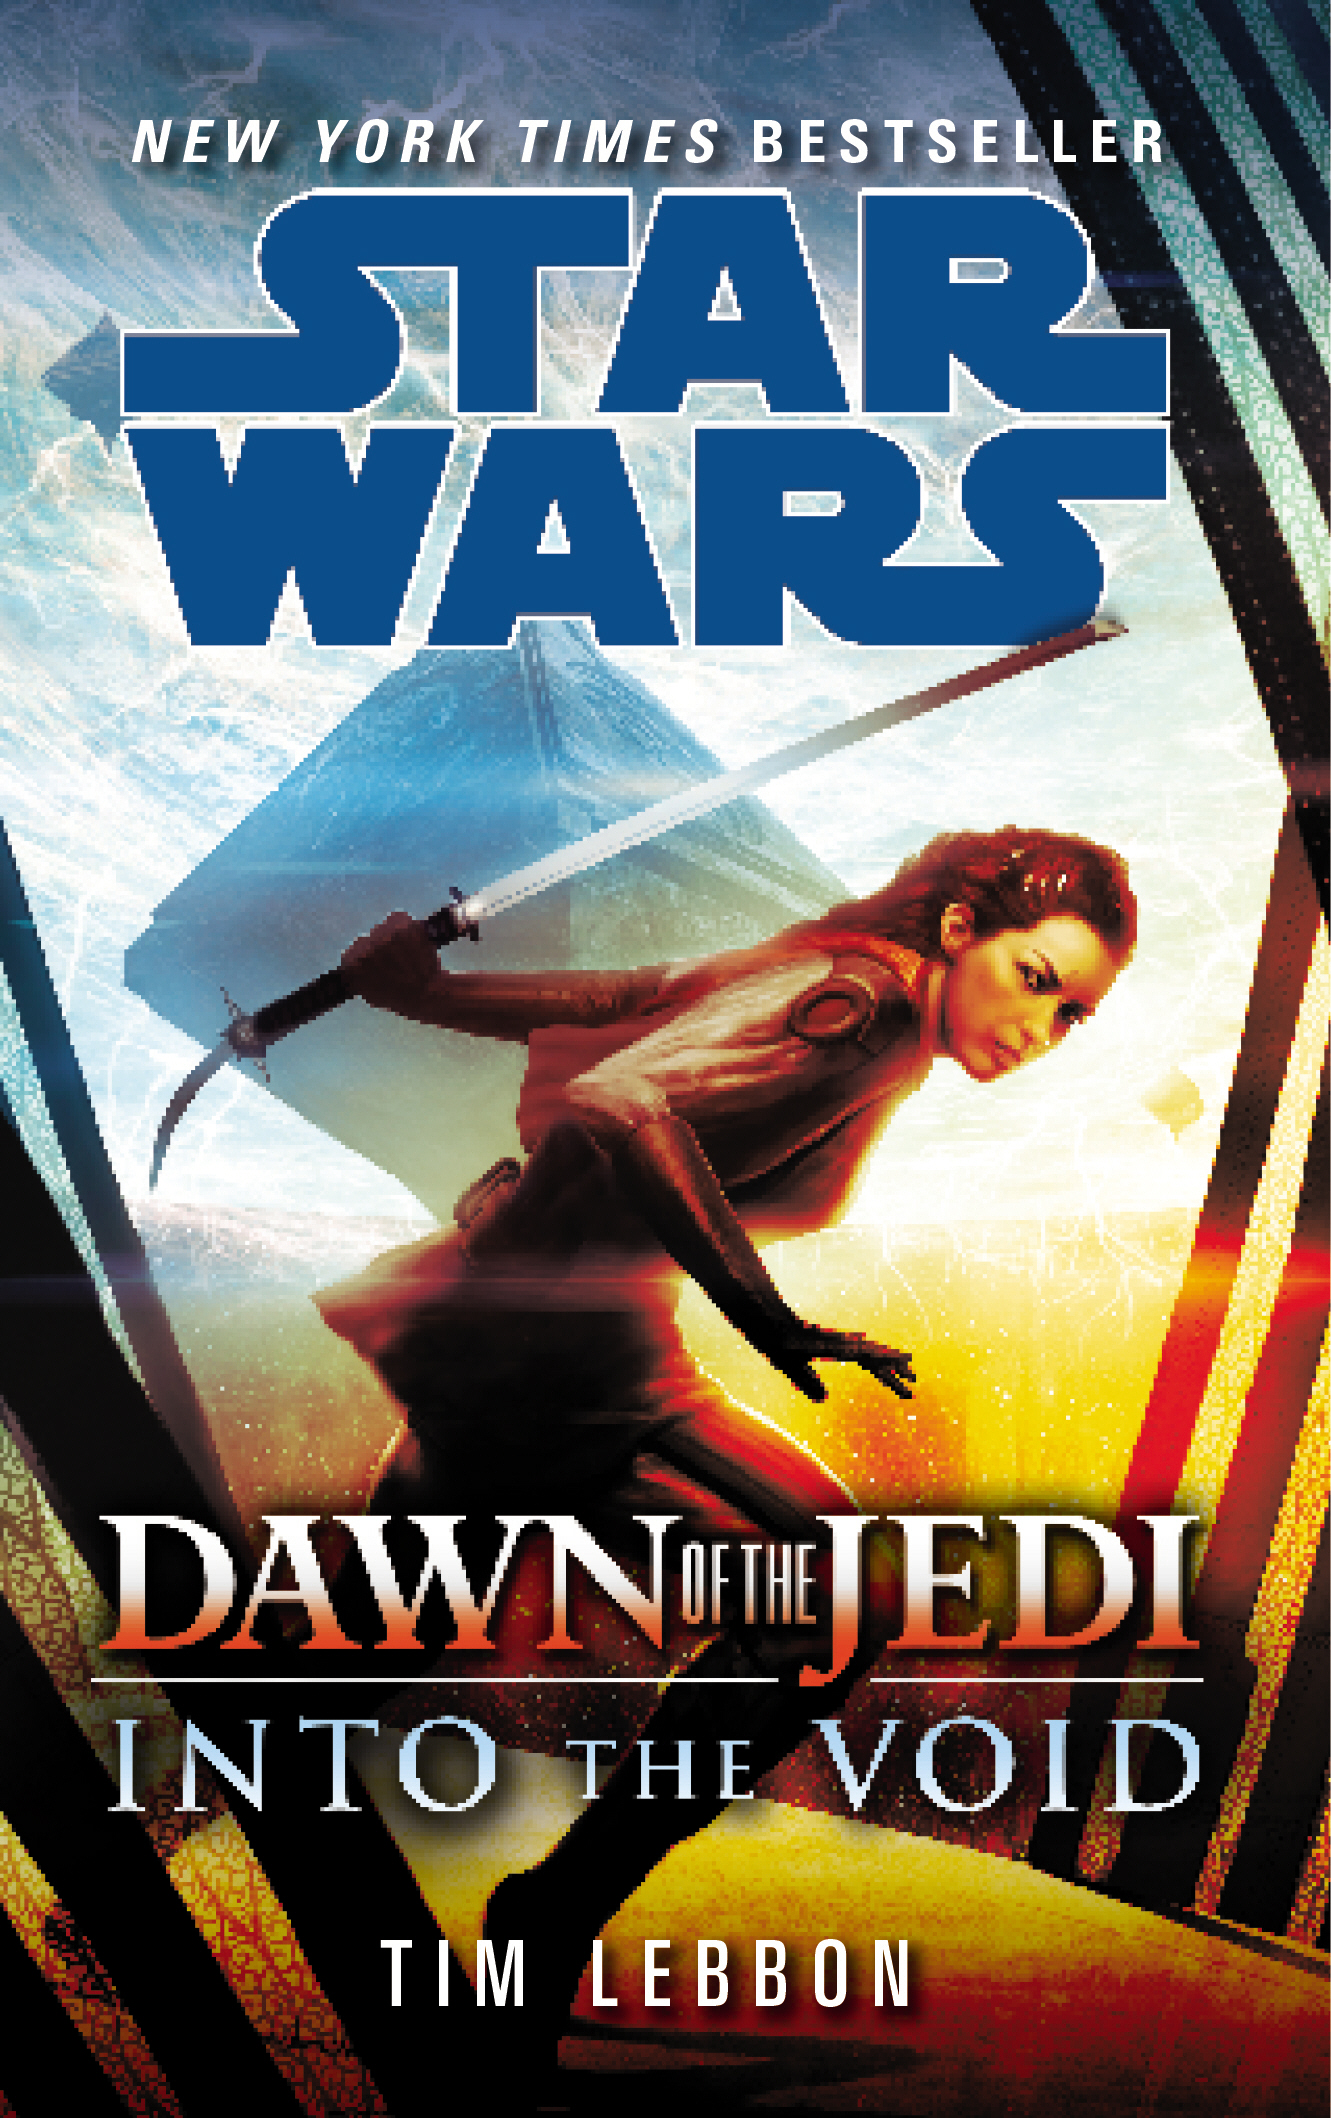 Star Wars Dawn Of The JediI InTo The Void